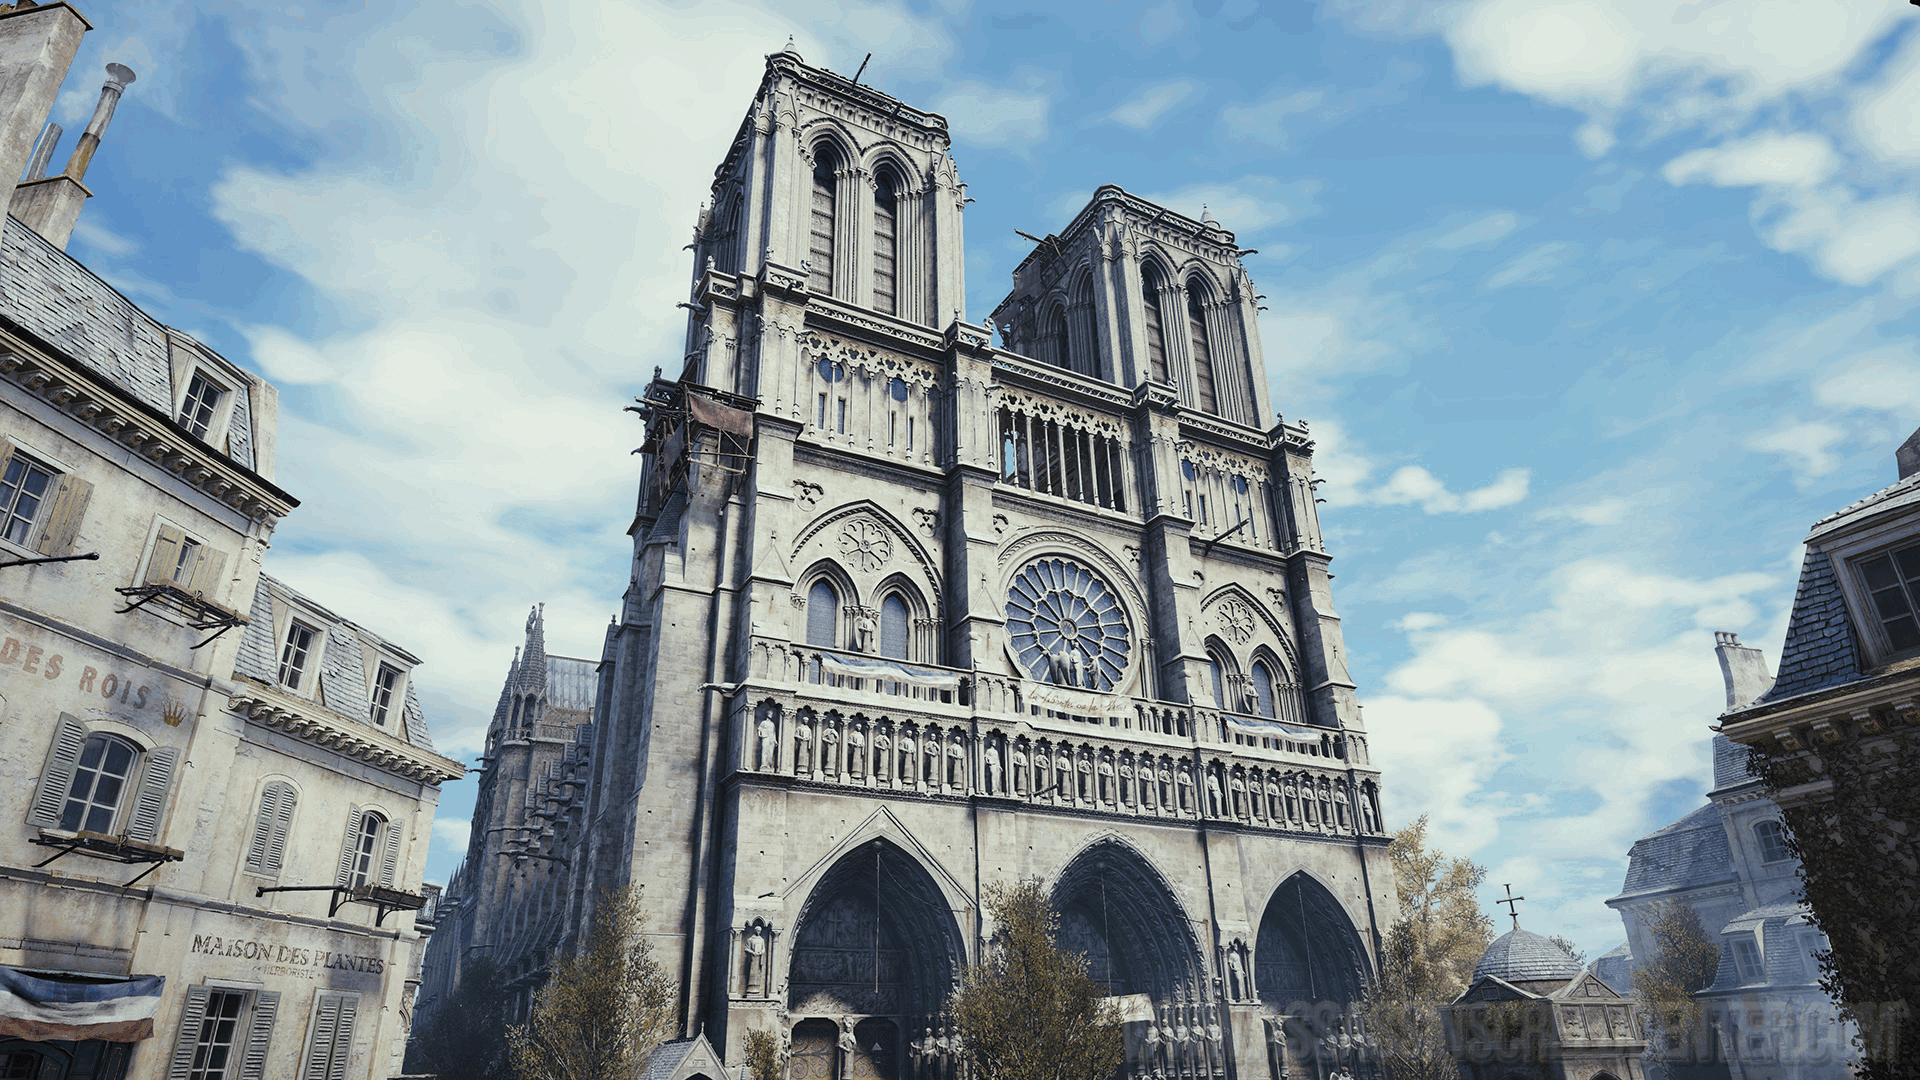 Notre Dame GIF - Find & Share on GIPHY